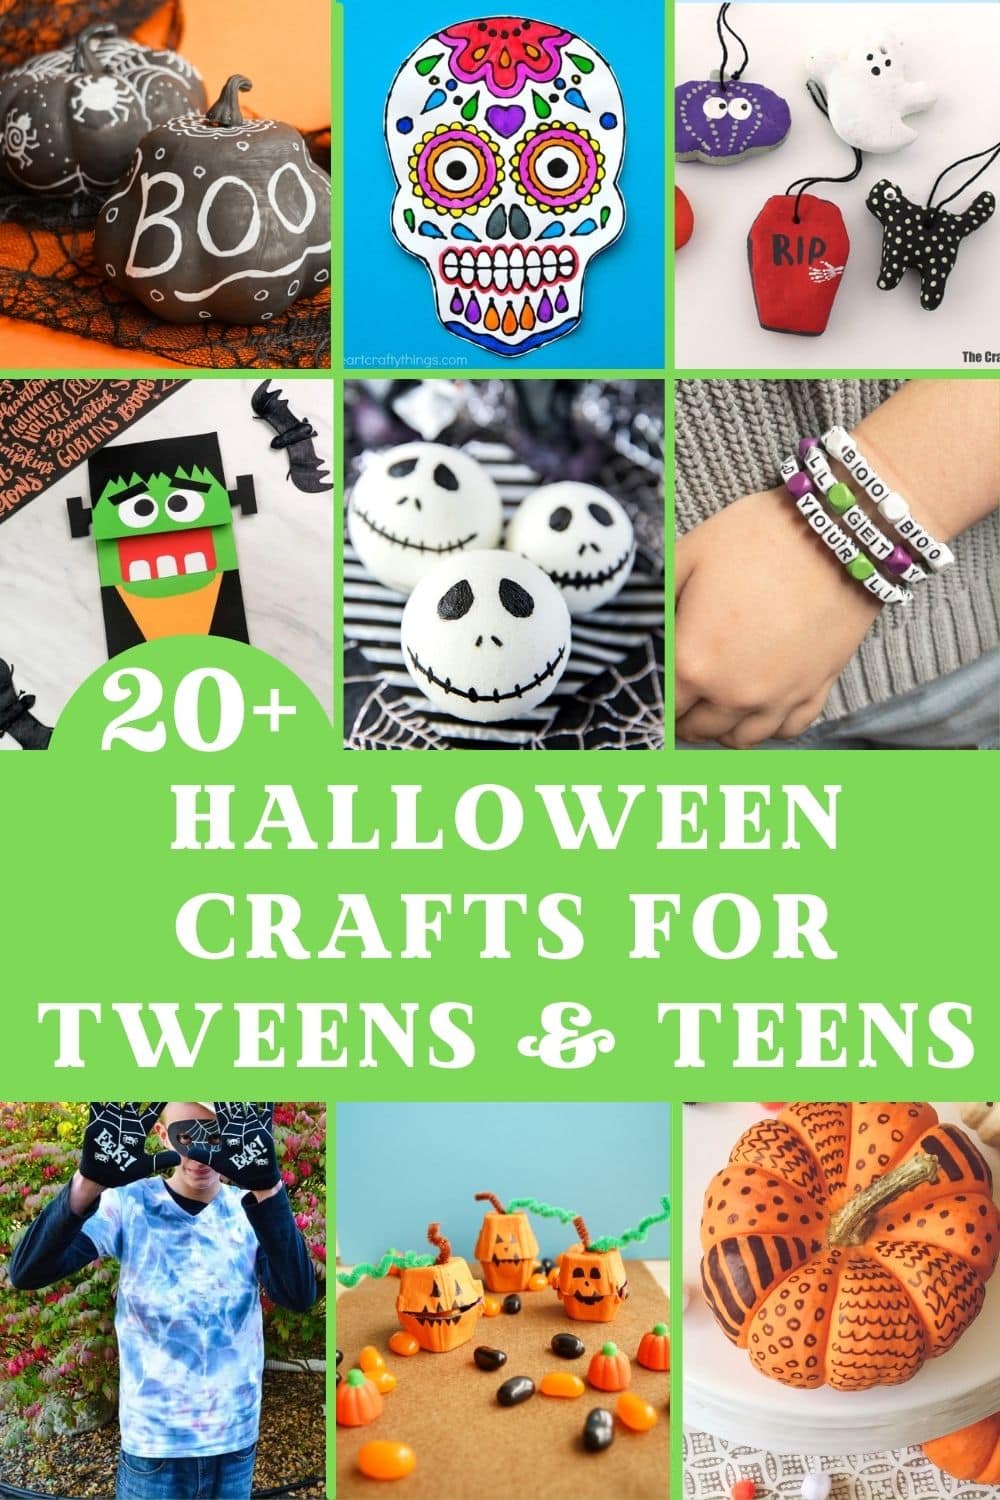 Fall Art Project for Teens or Tweens - Inner Child Fun